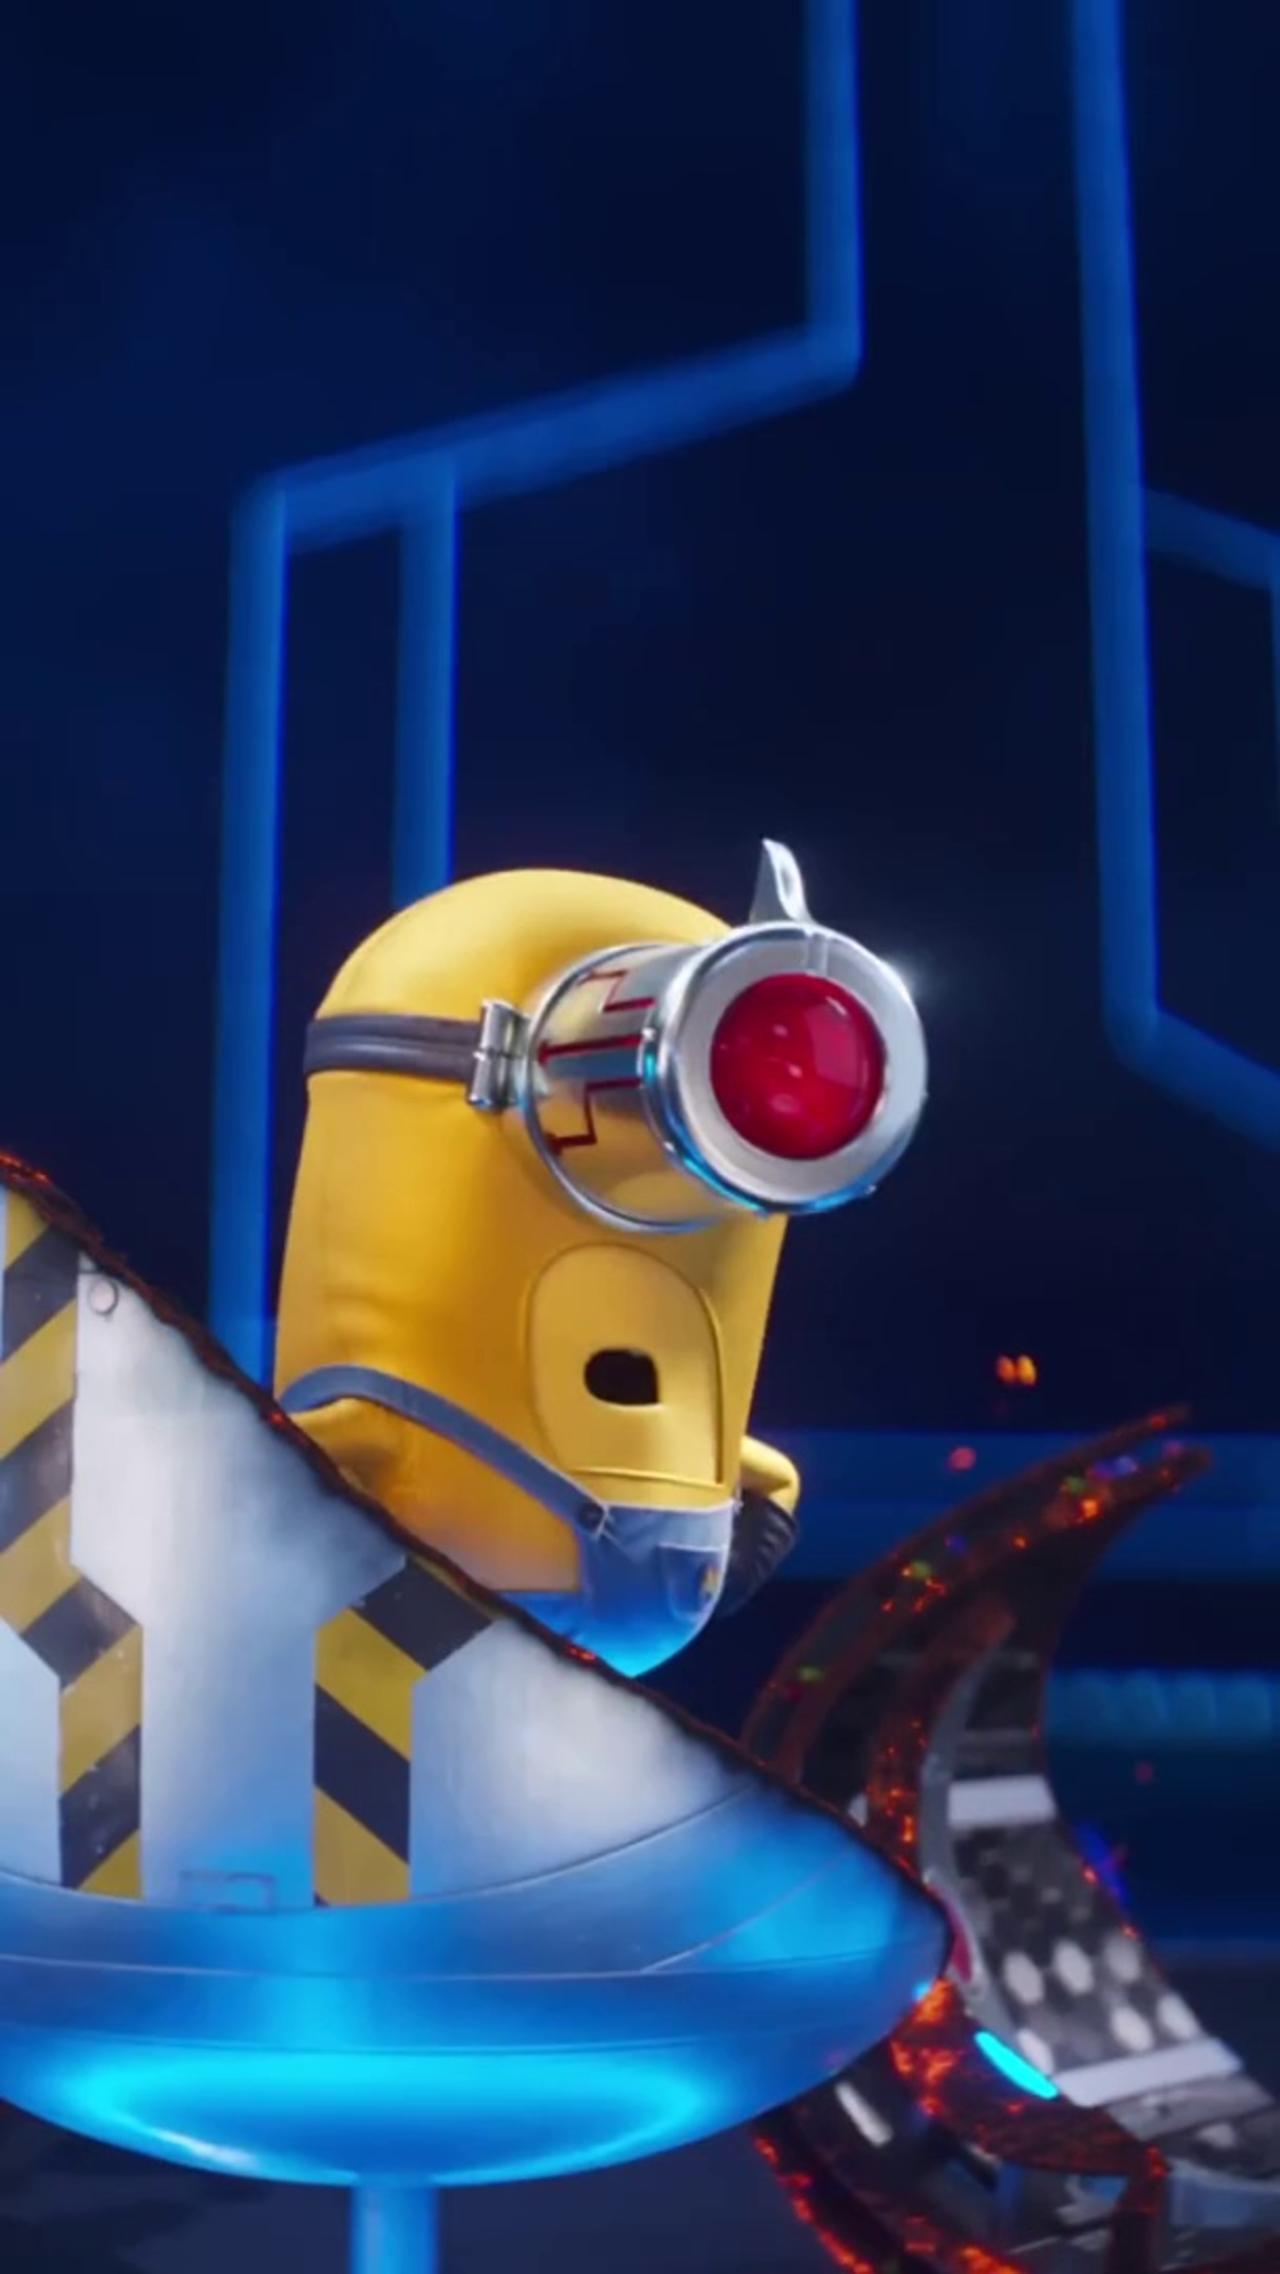 New Trailer for Despicable Me 4 with Steve Carell